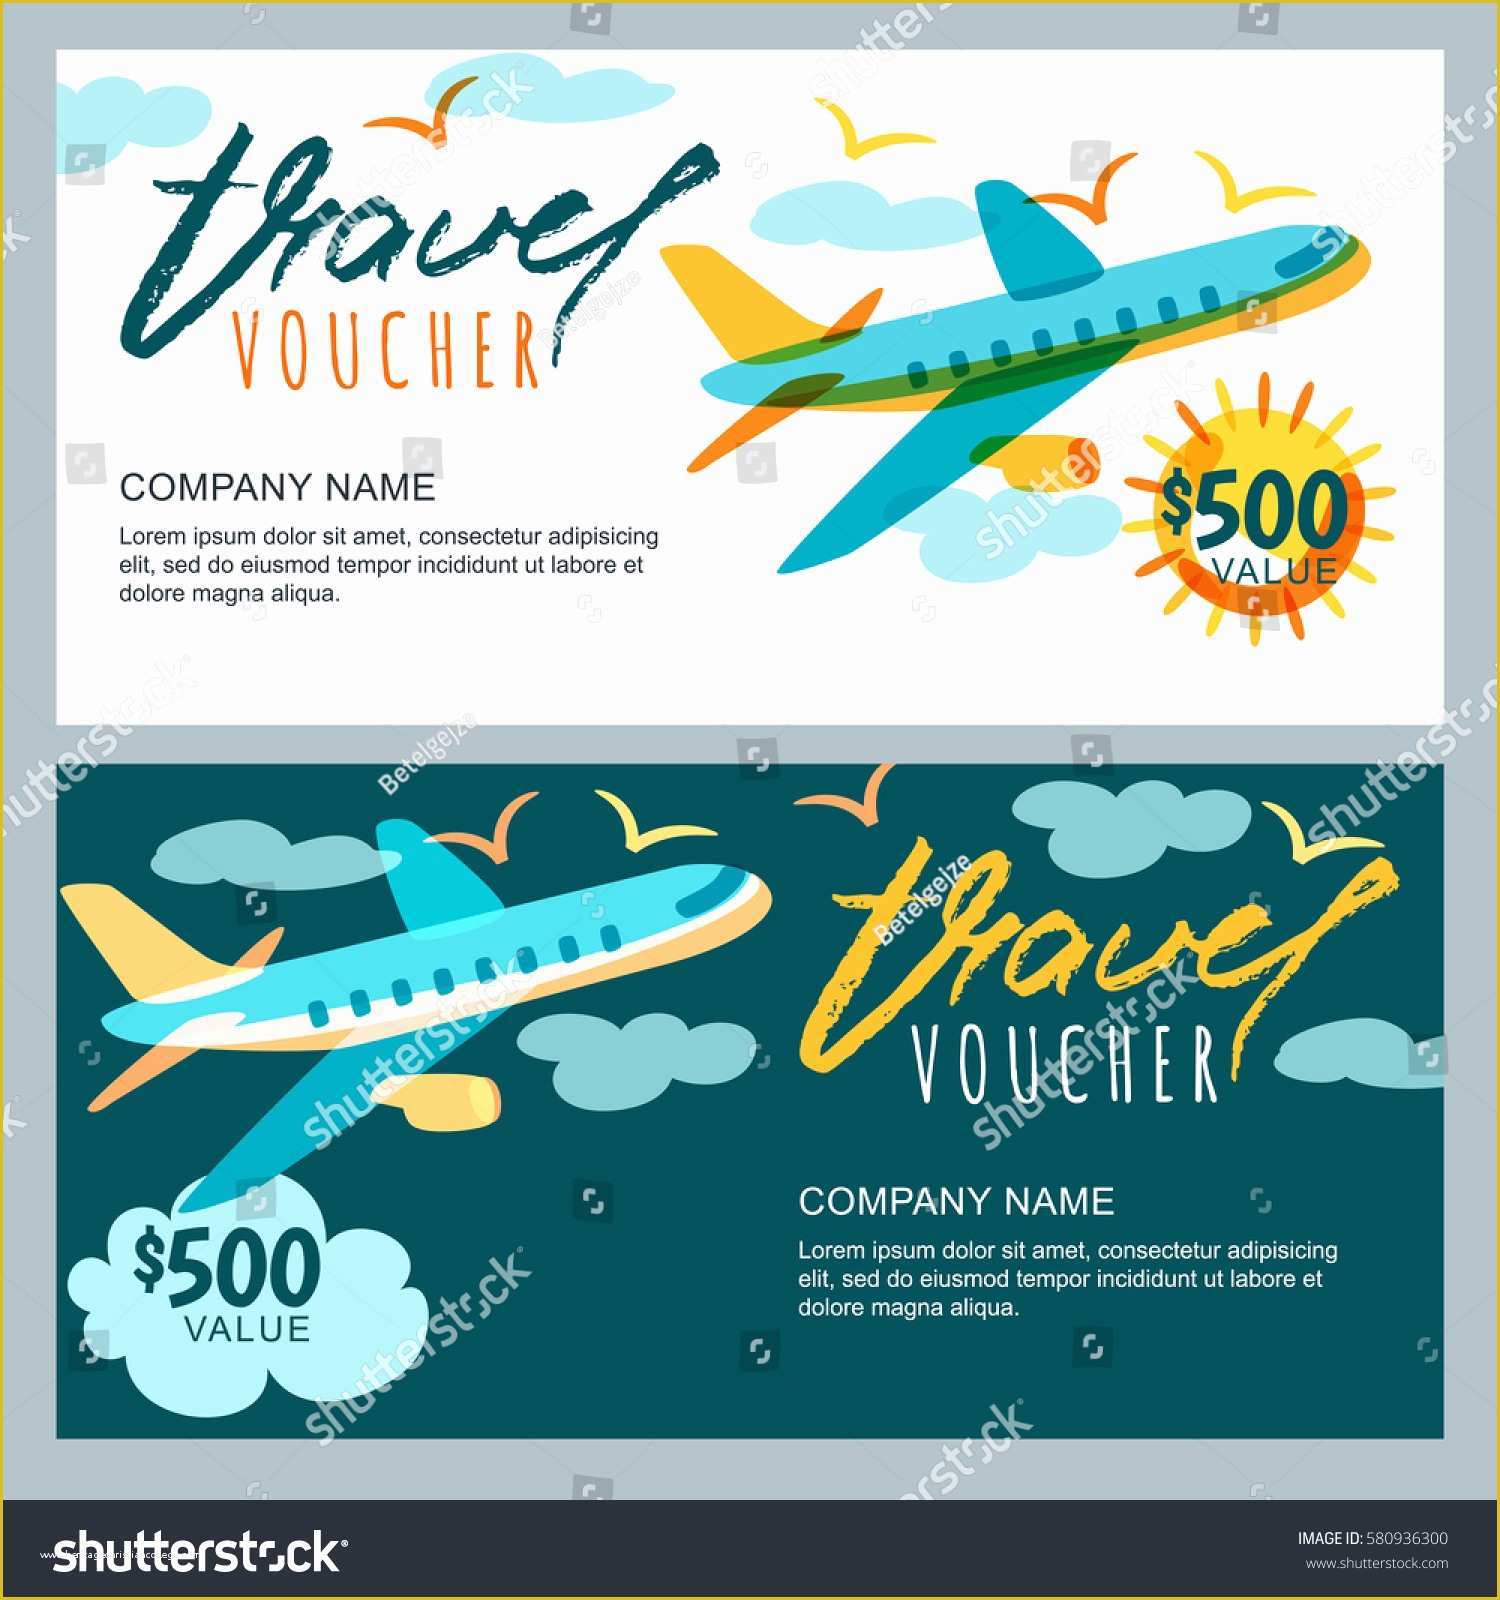 travel-voucher-template-free-of-vector-gift-travel-voucher-template